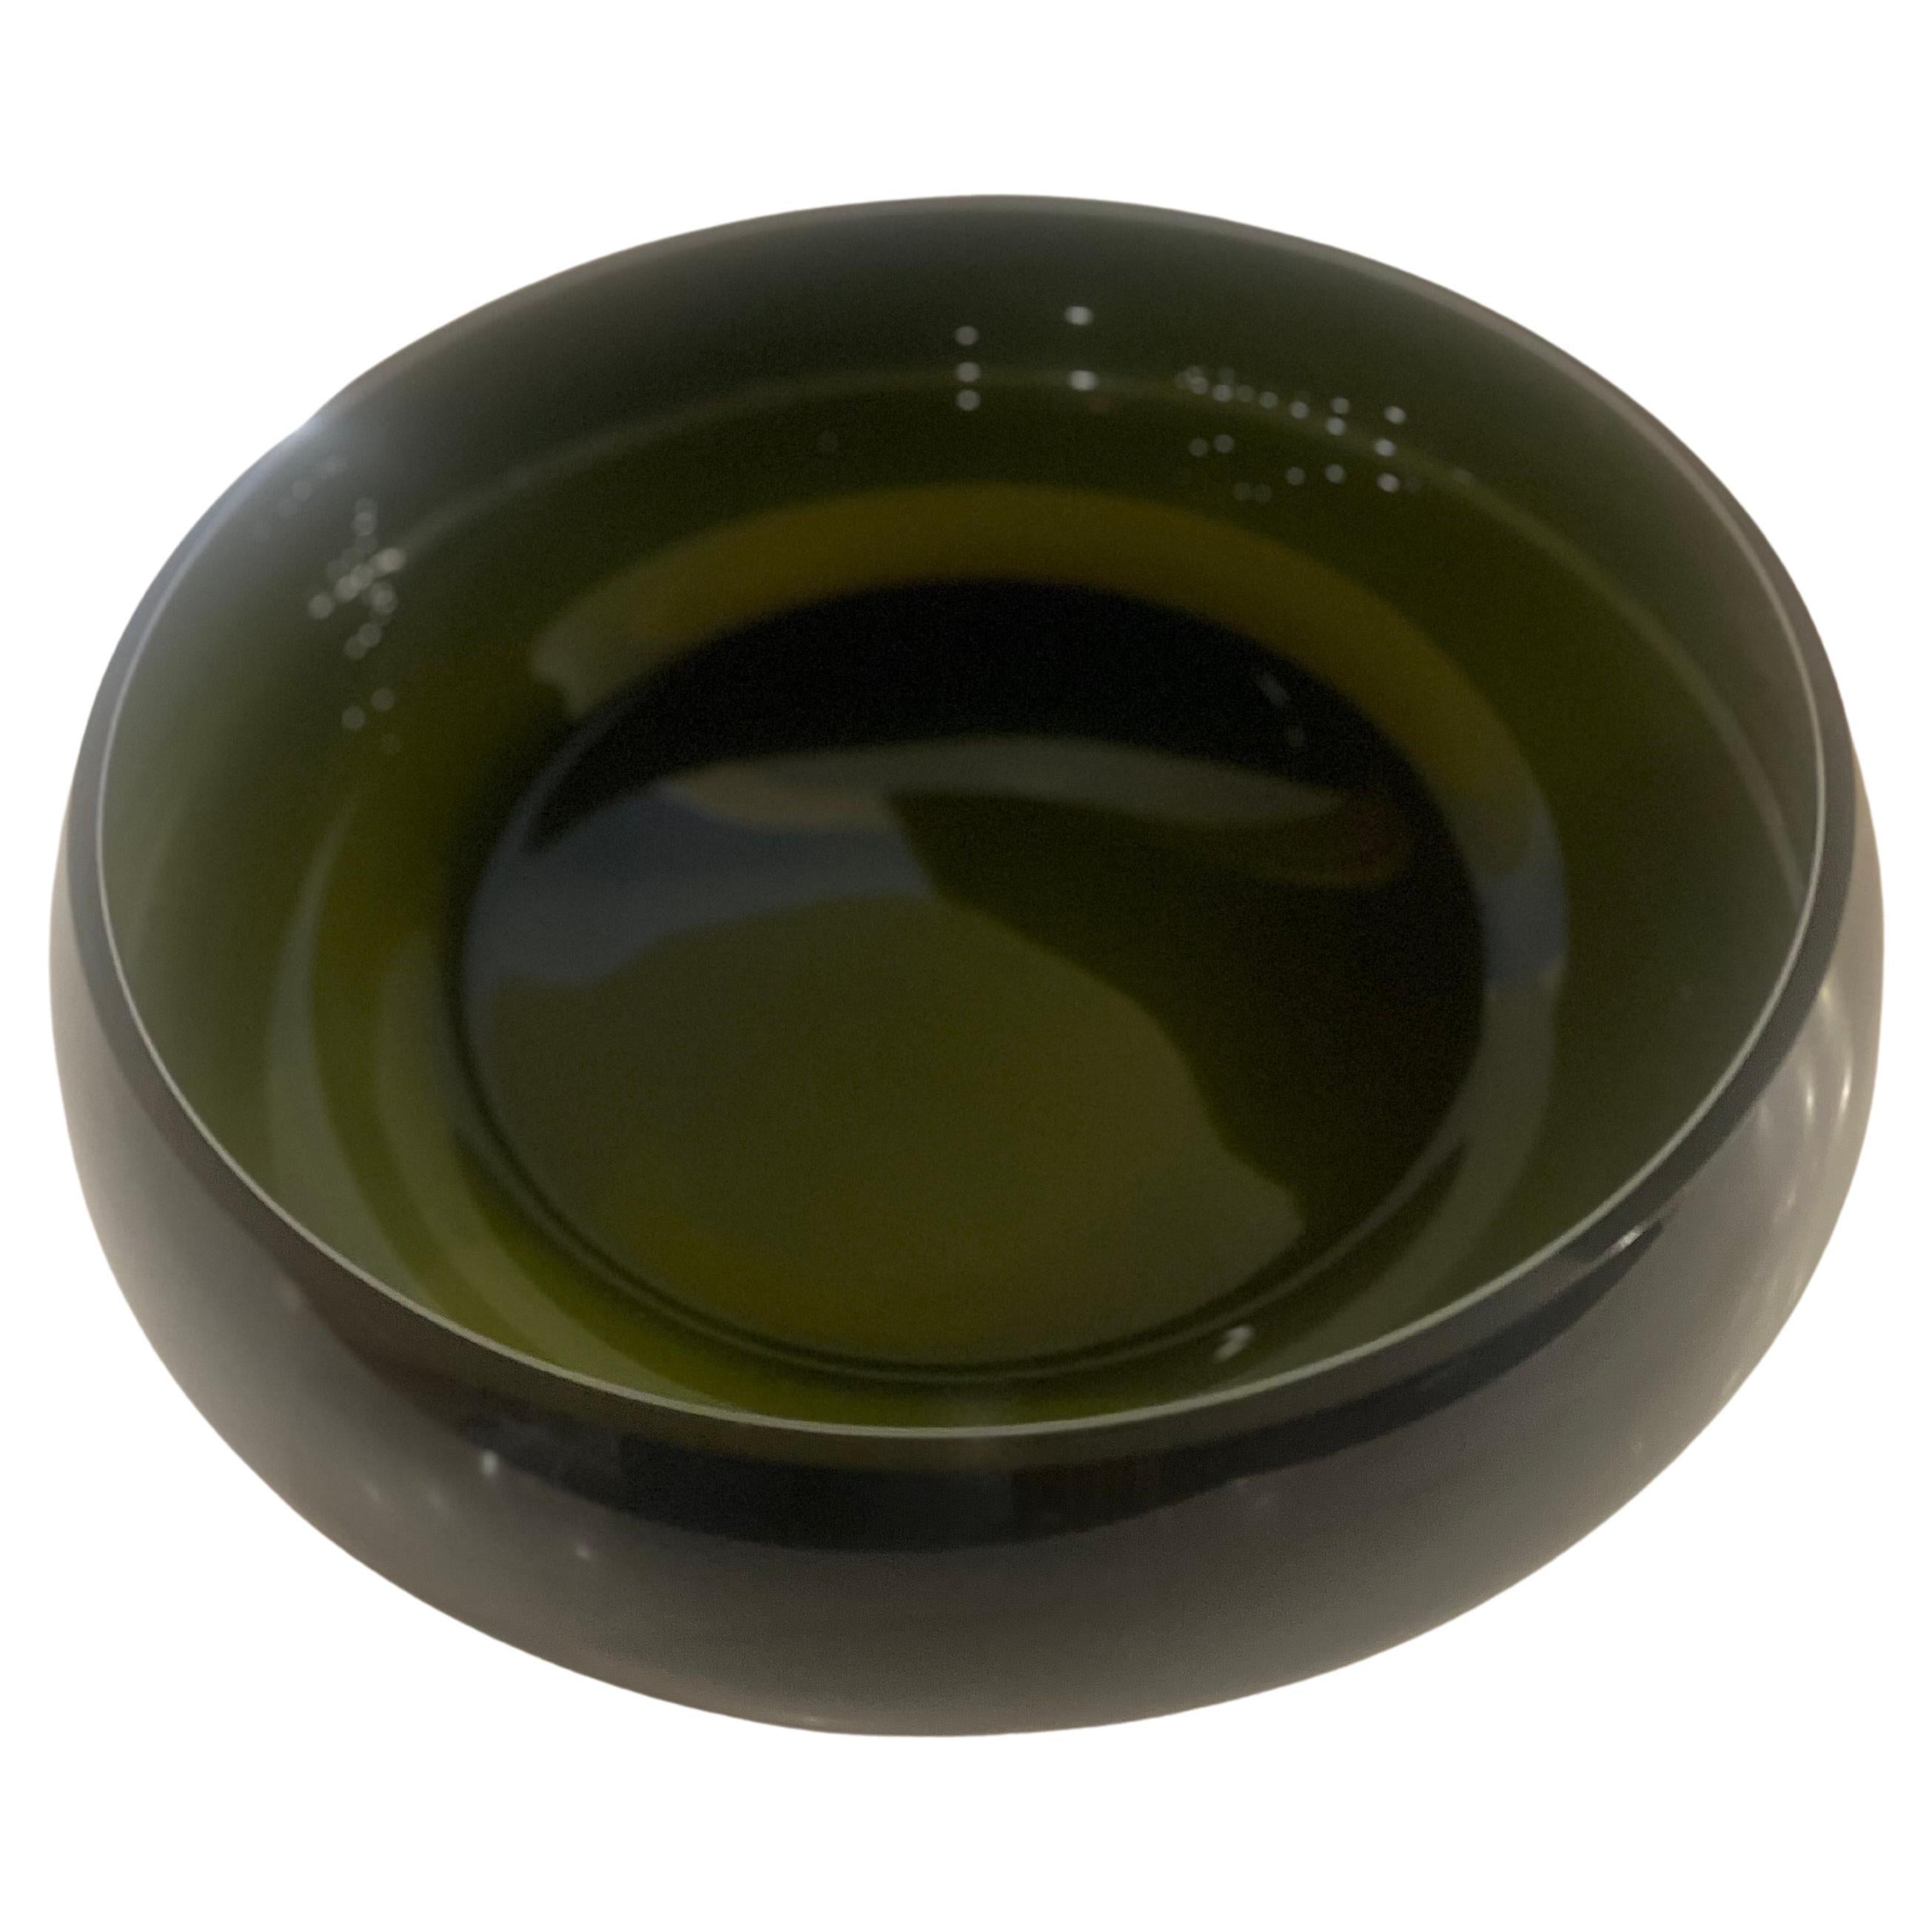 black glass outside with encased green glass insert 
bowl, excellent condition no chips or cracks nice and heavy, circa the 1970s. great for Danish modern ,mid century Scandinavian glass

